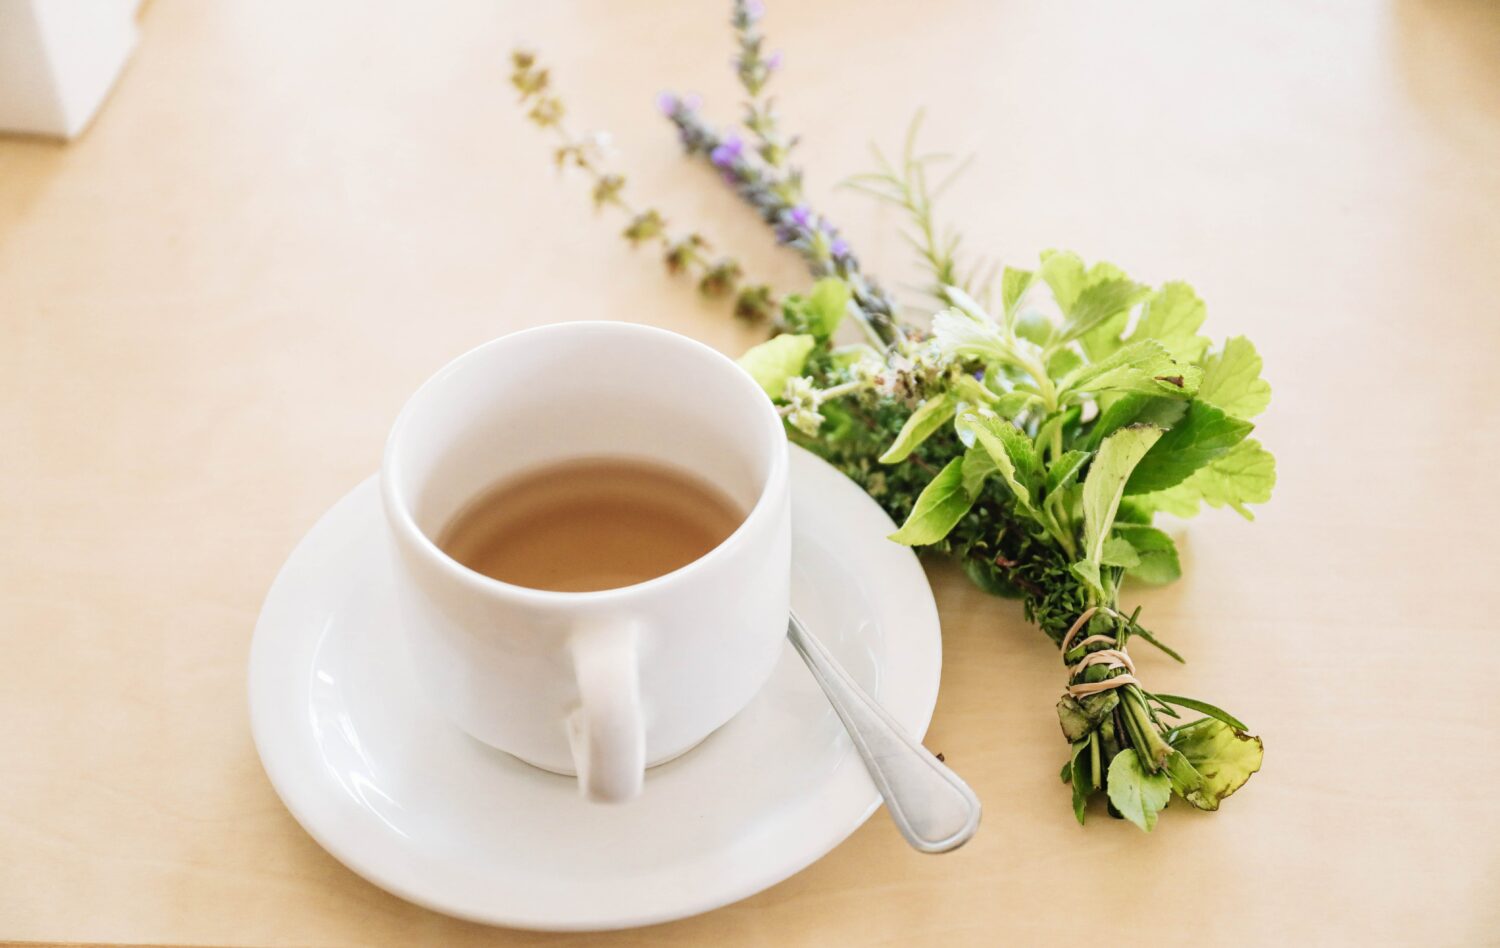 debloat, Half filled white tea cup with saucer and spoon sits on a wooden table next to a bundle of herbs.